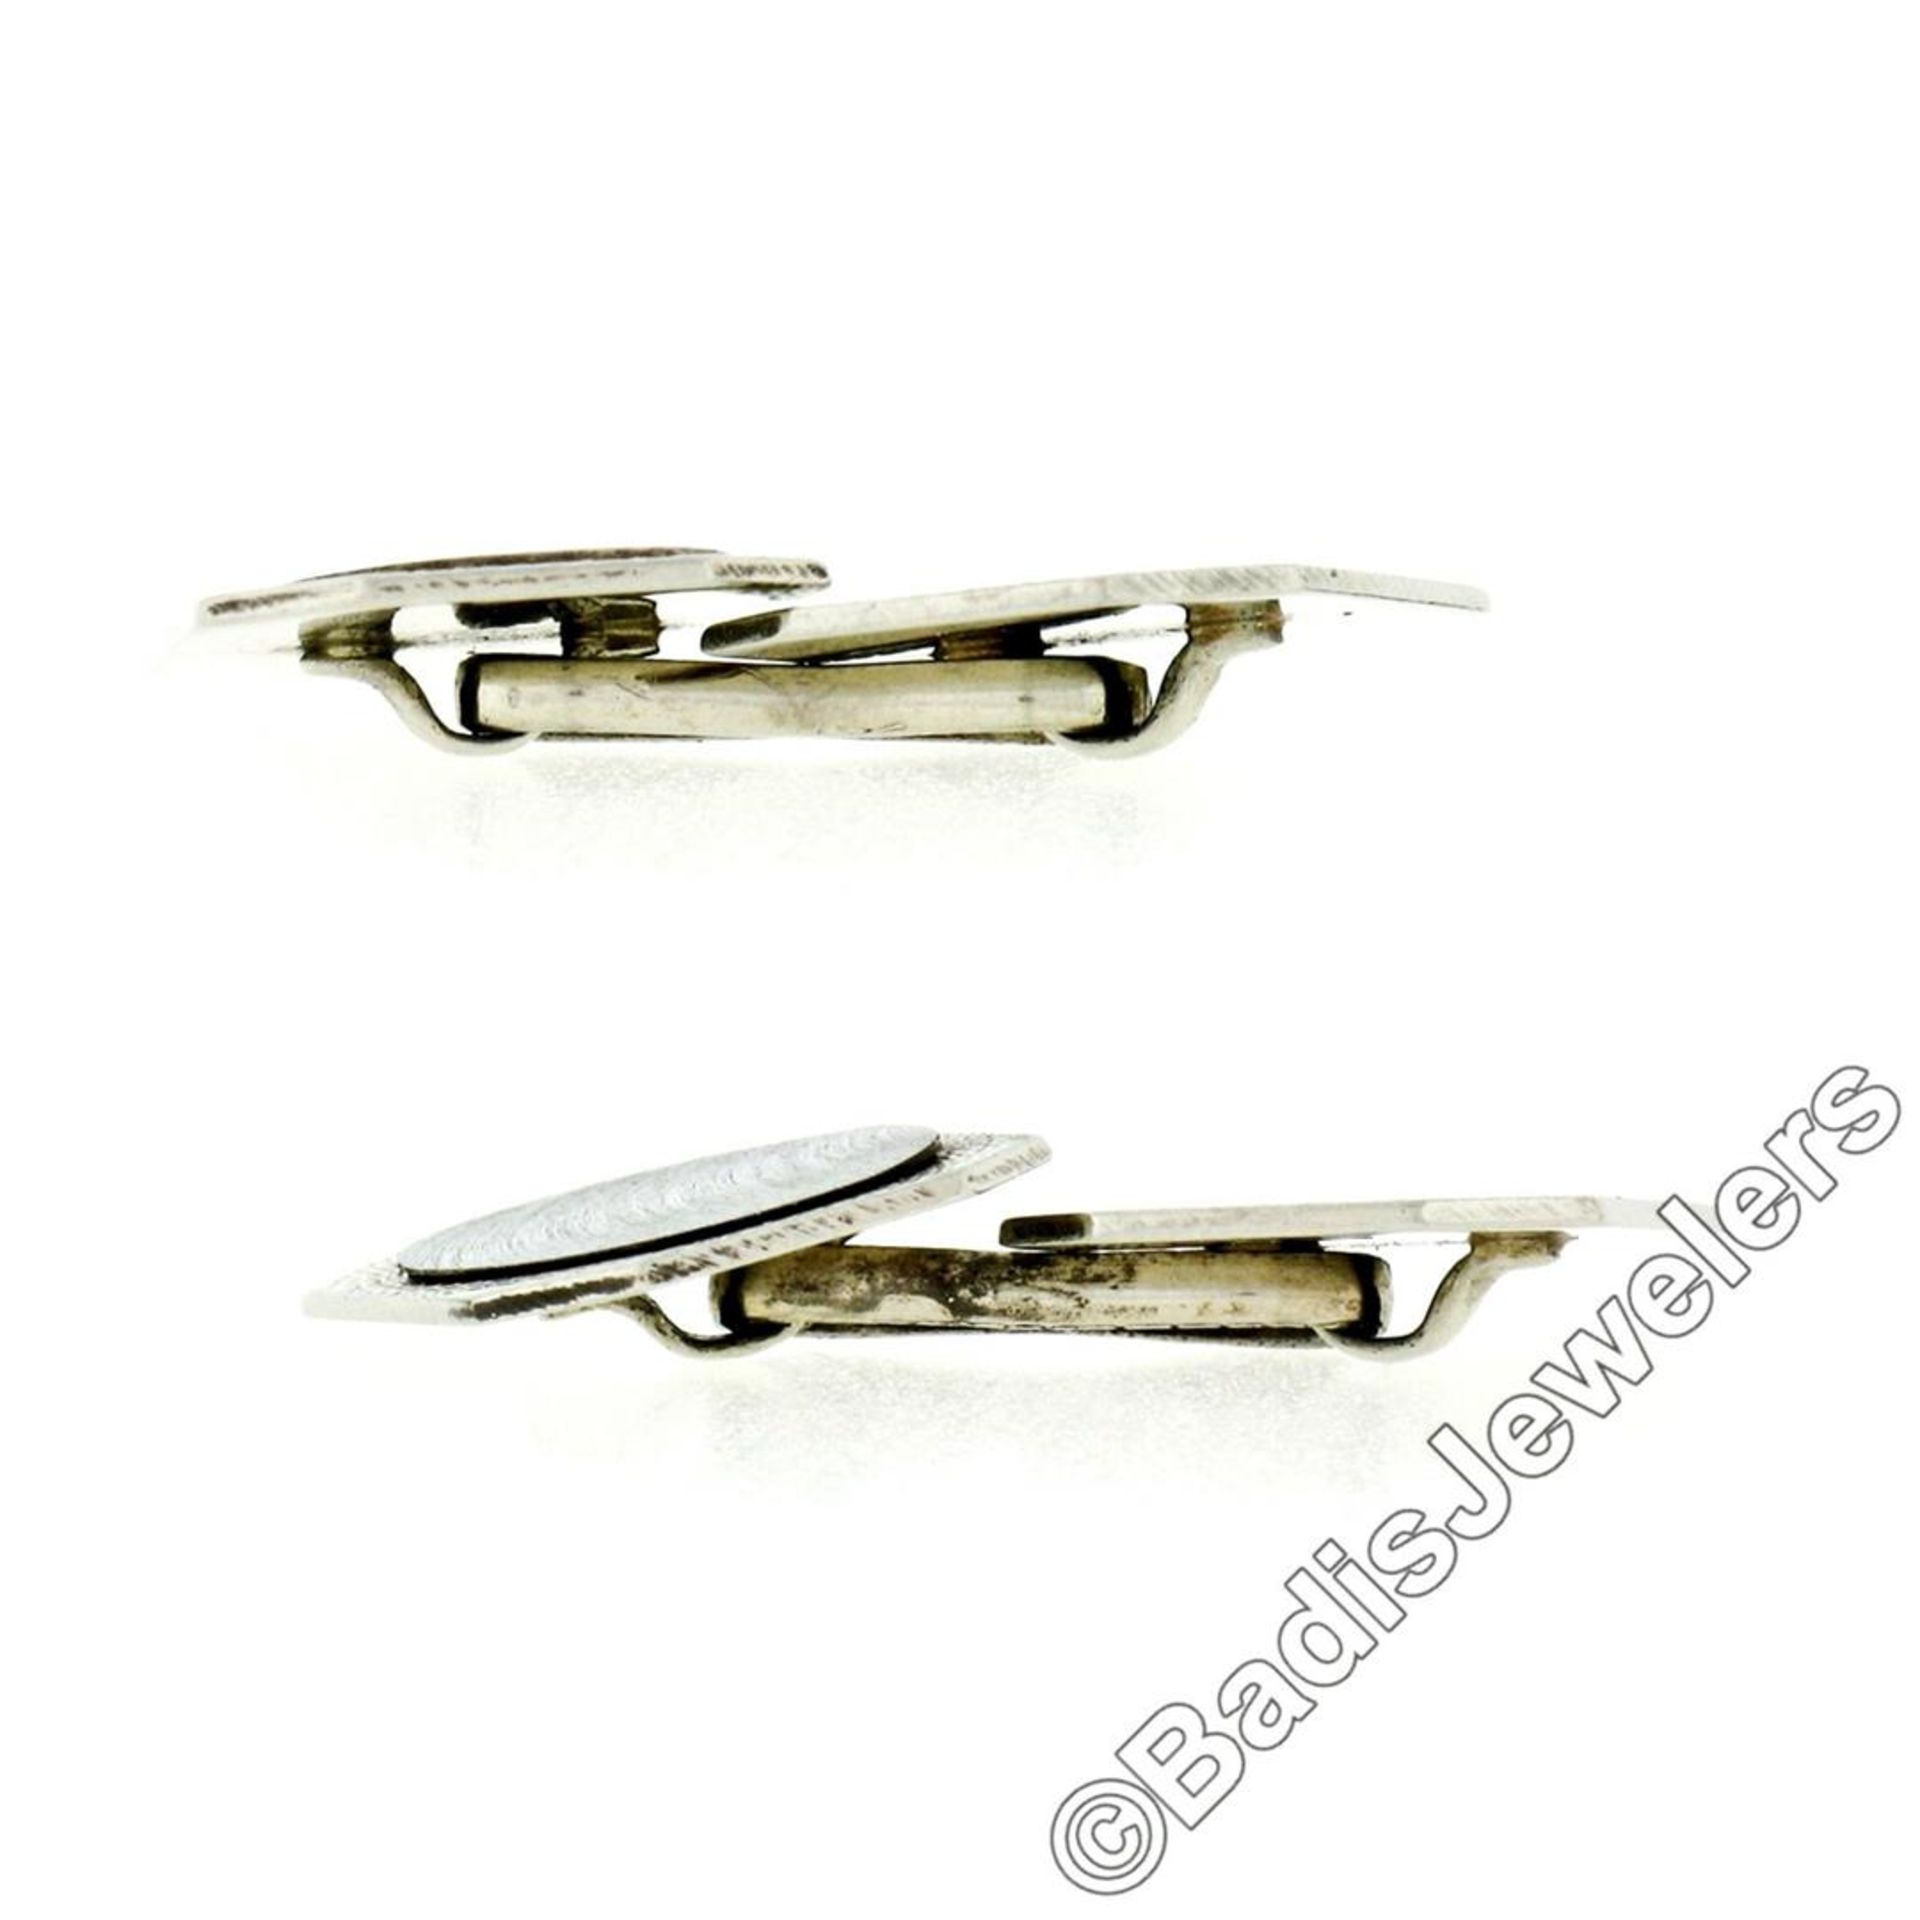 Antique Art Deco 14kt White Gold Etched Dual Panel Cuff Links - Image 4 of 5